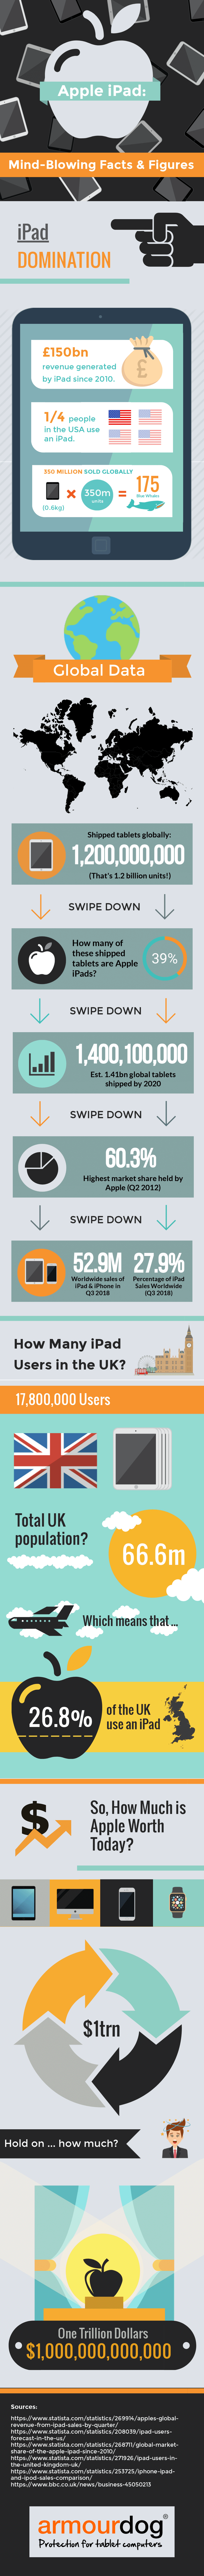 iPad 2018: Mindblowing Facts & Figures #Infographic